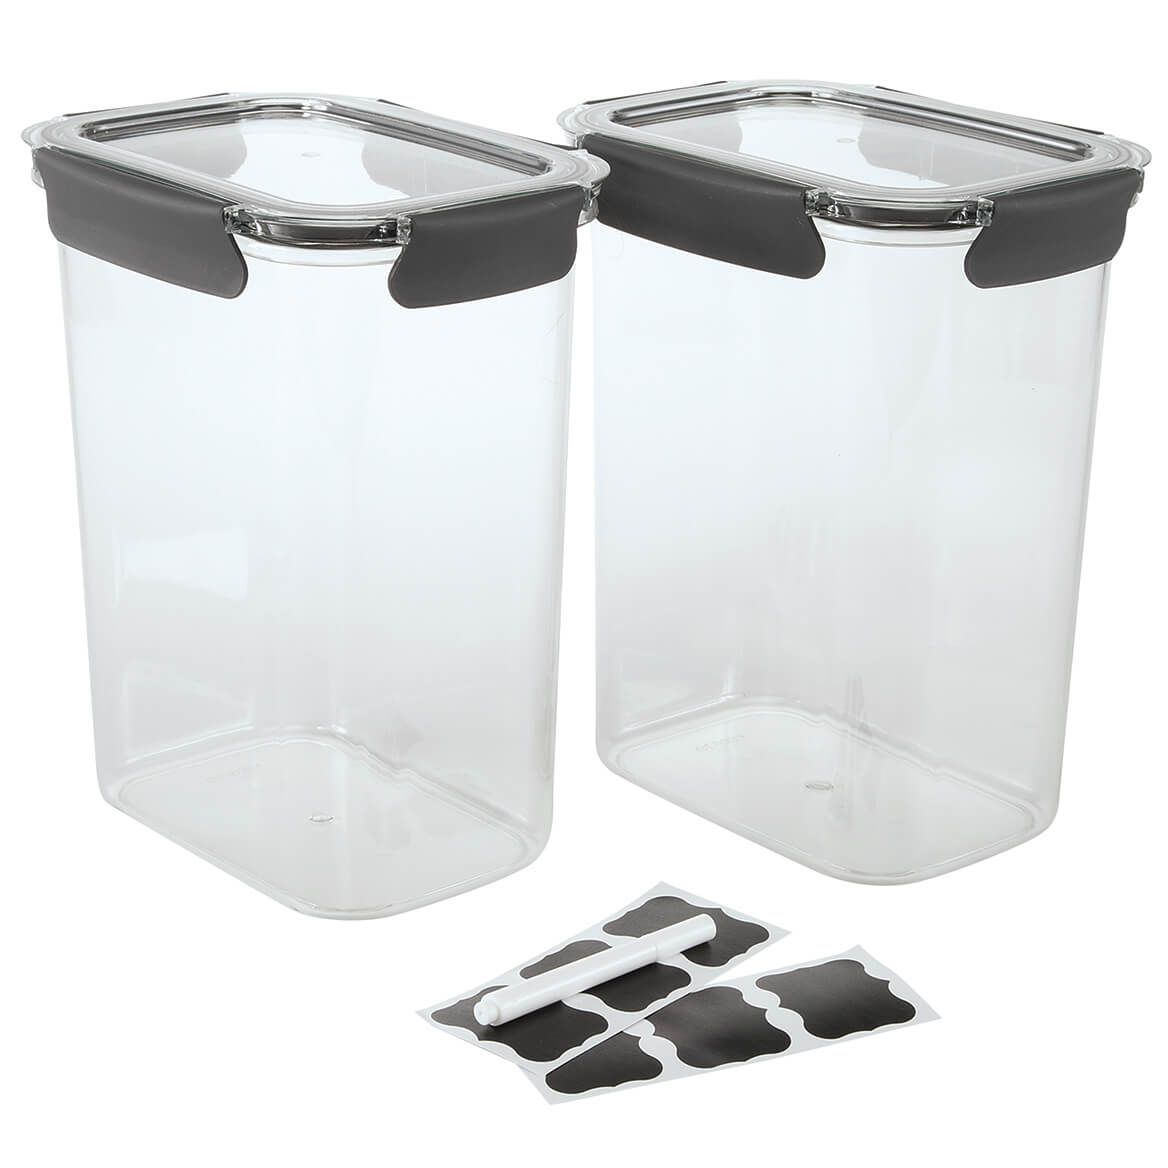 Chef's Own Large Airtight Containers, Set of 2 + '-' + 376599